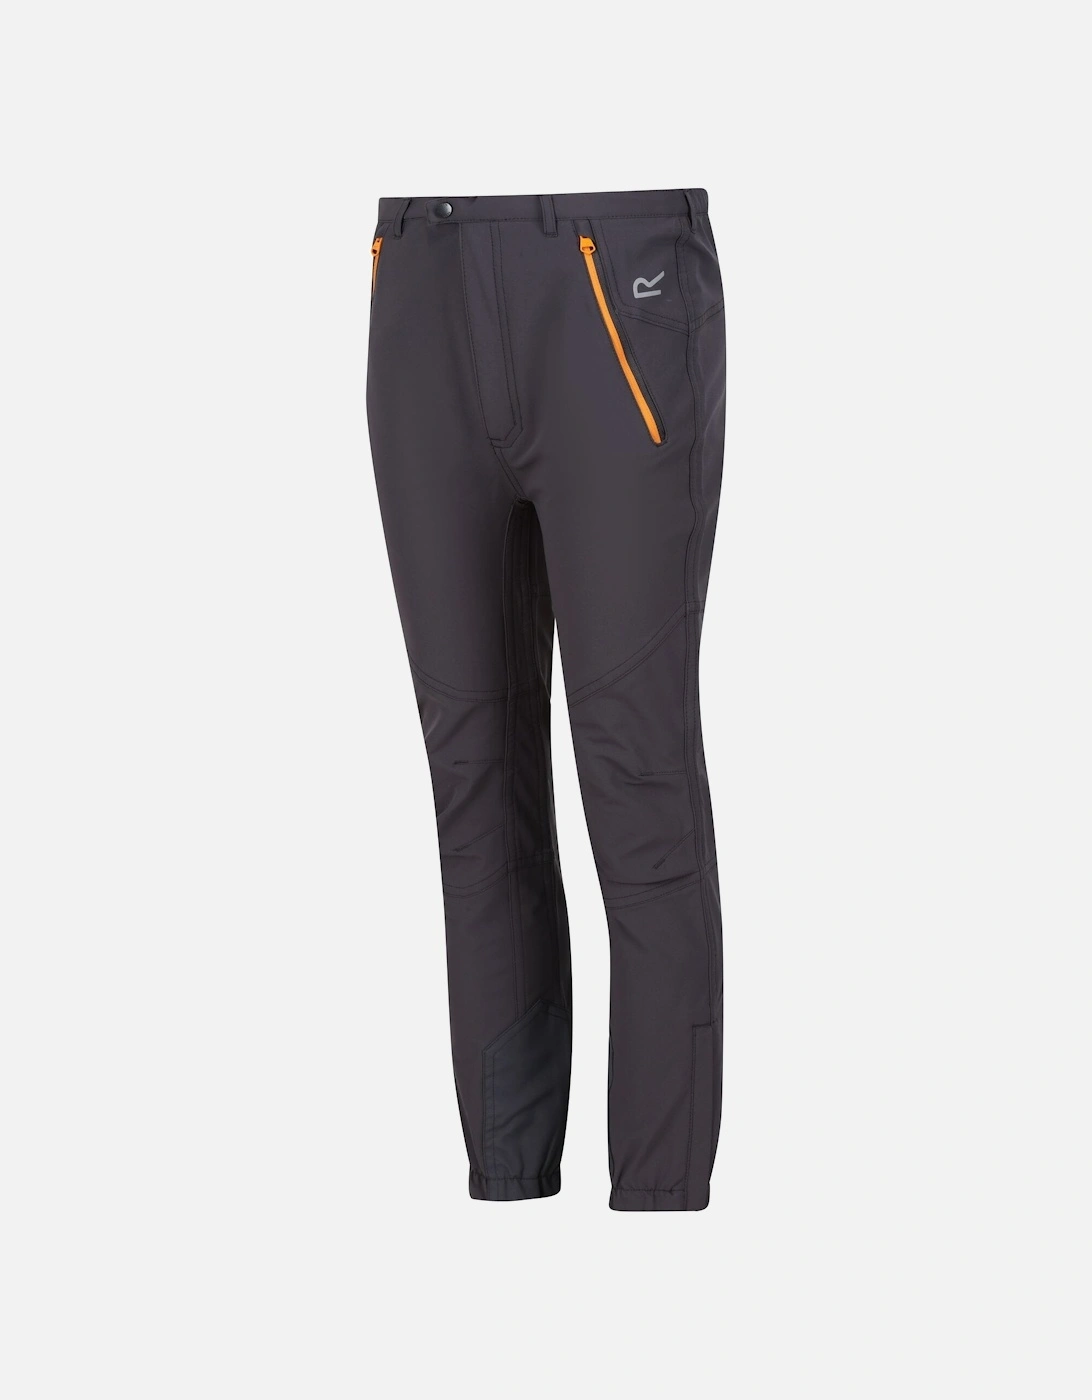 Childrens/Kids Tech Mountain Hiking Trousers, 5 of 4